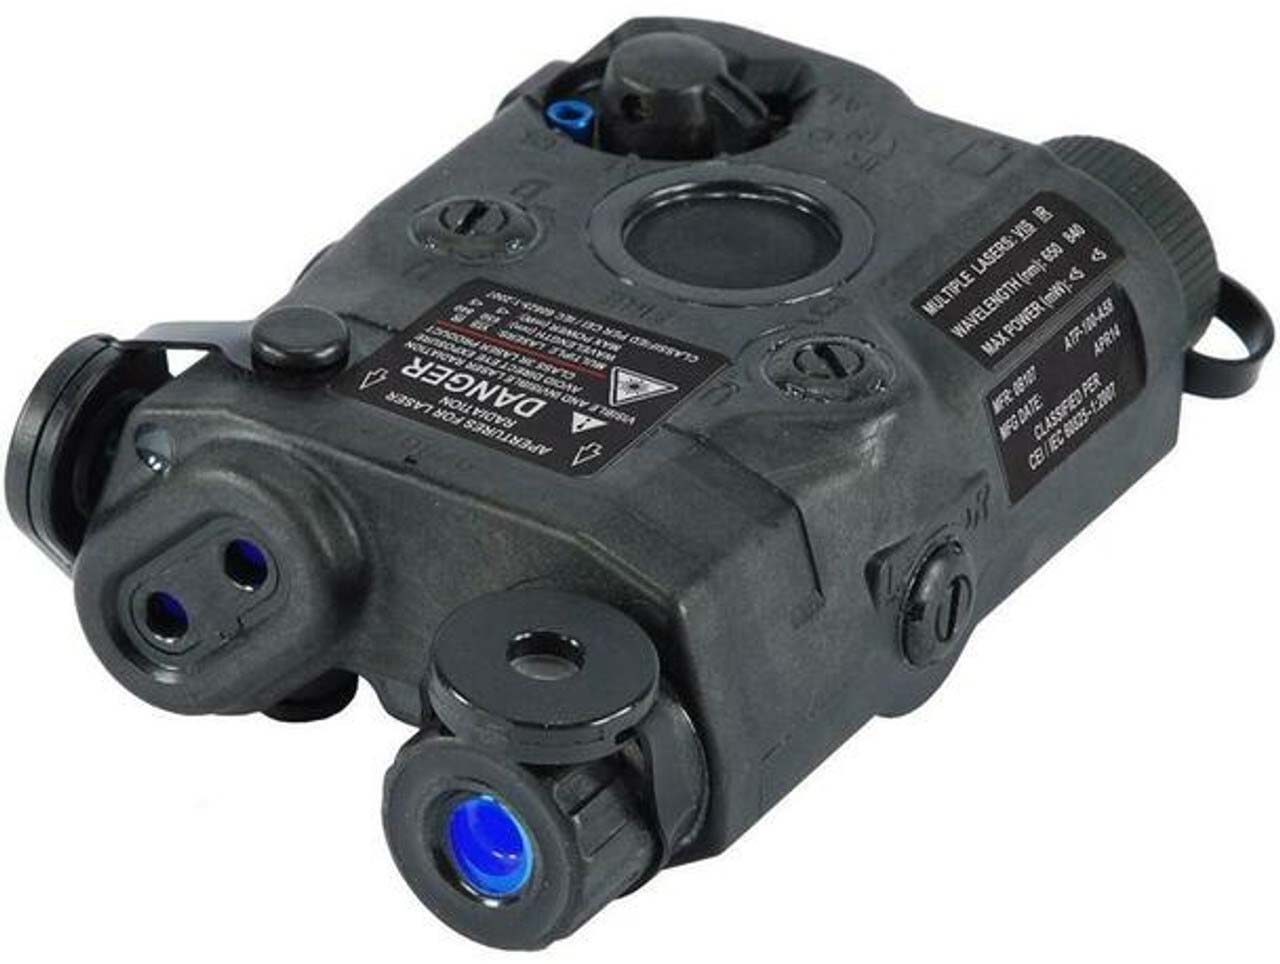 L3 ATPIAL-C Laser Sight | $50.00 Off w/ Free Shipping